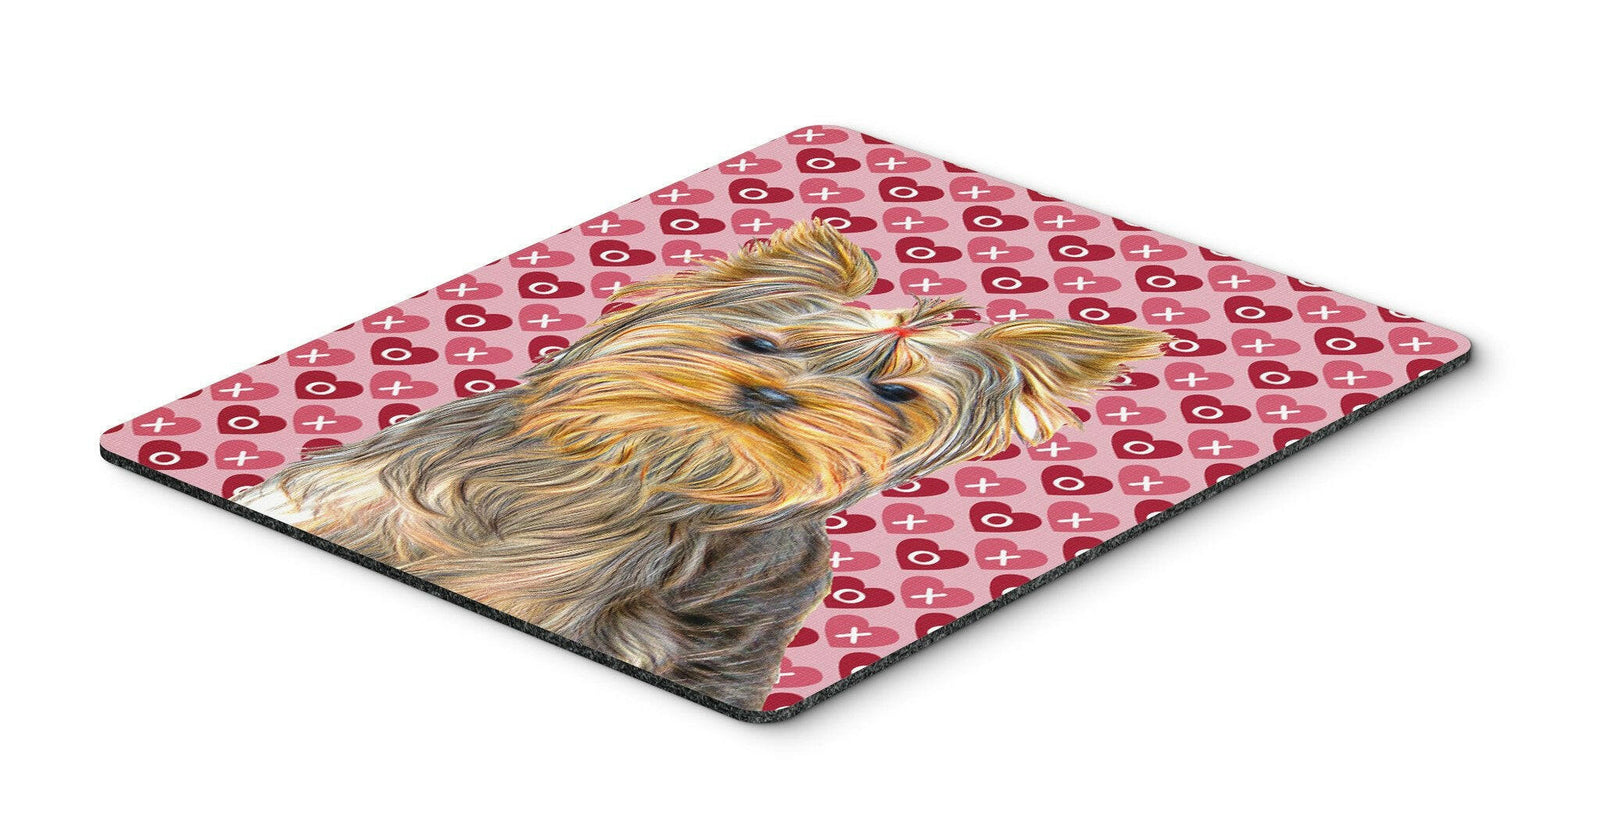 Hearts Love and Valentine's Day Yorkie / Yorkshire Terrier Mouse Pad, Hot Pad or Trivet KJ1191MP by Caroline's Treasures